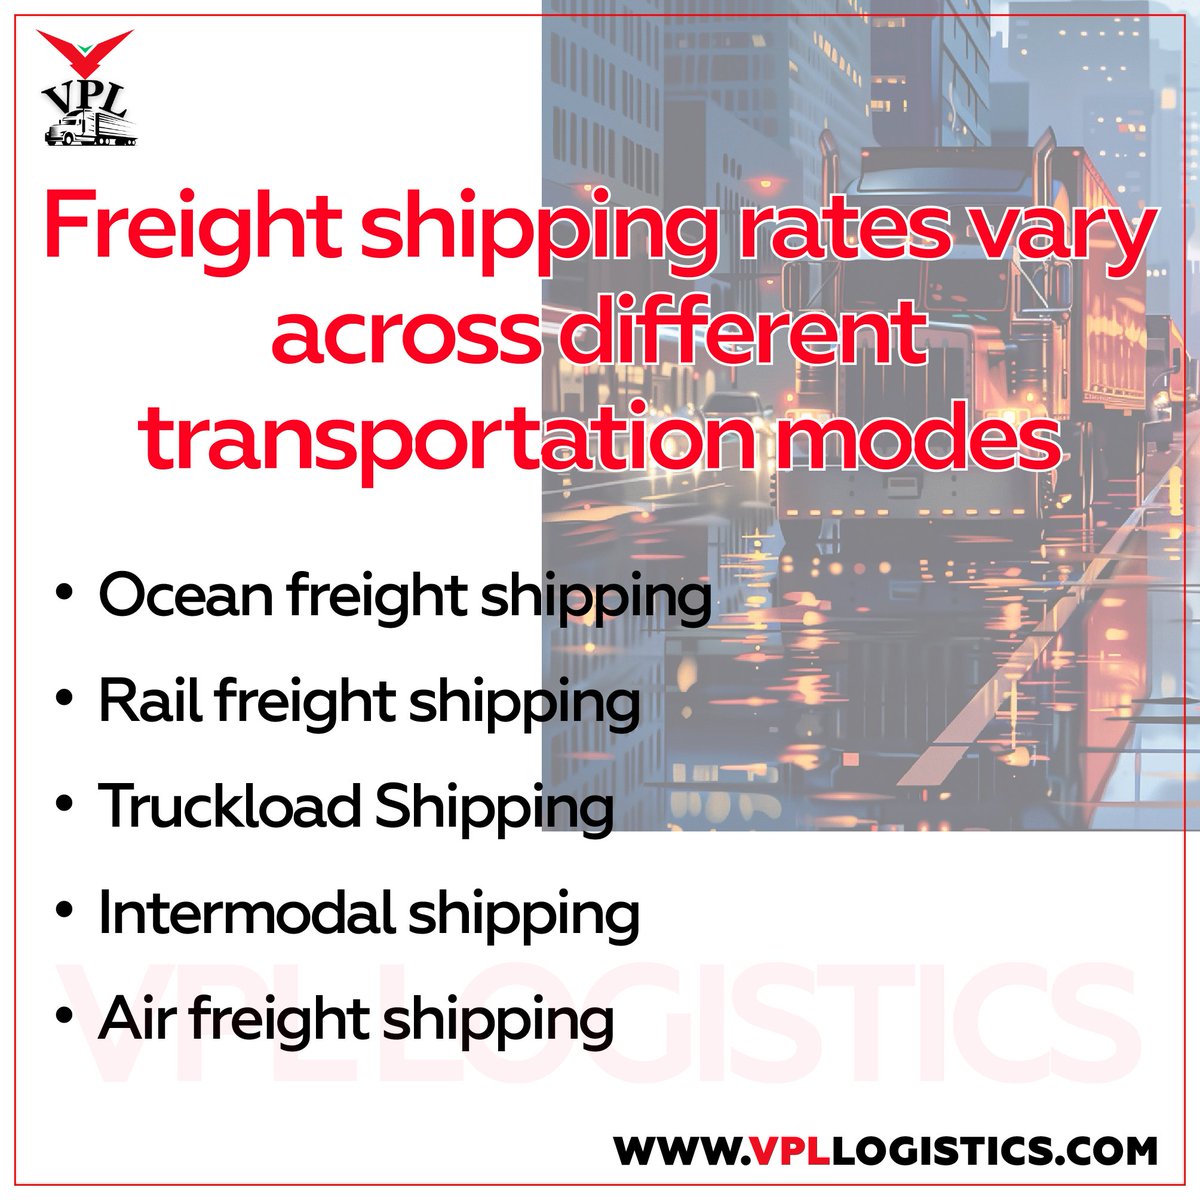 How do freight shipping rates vary across different transportation modes?

#vensplailogistics #ShippingSolutions #TruckingBroker